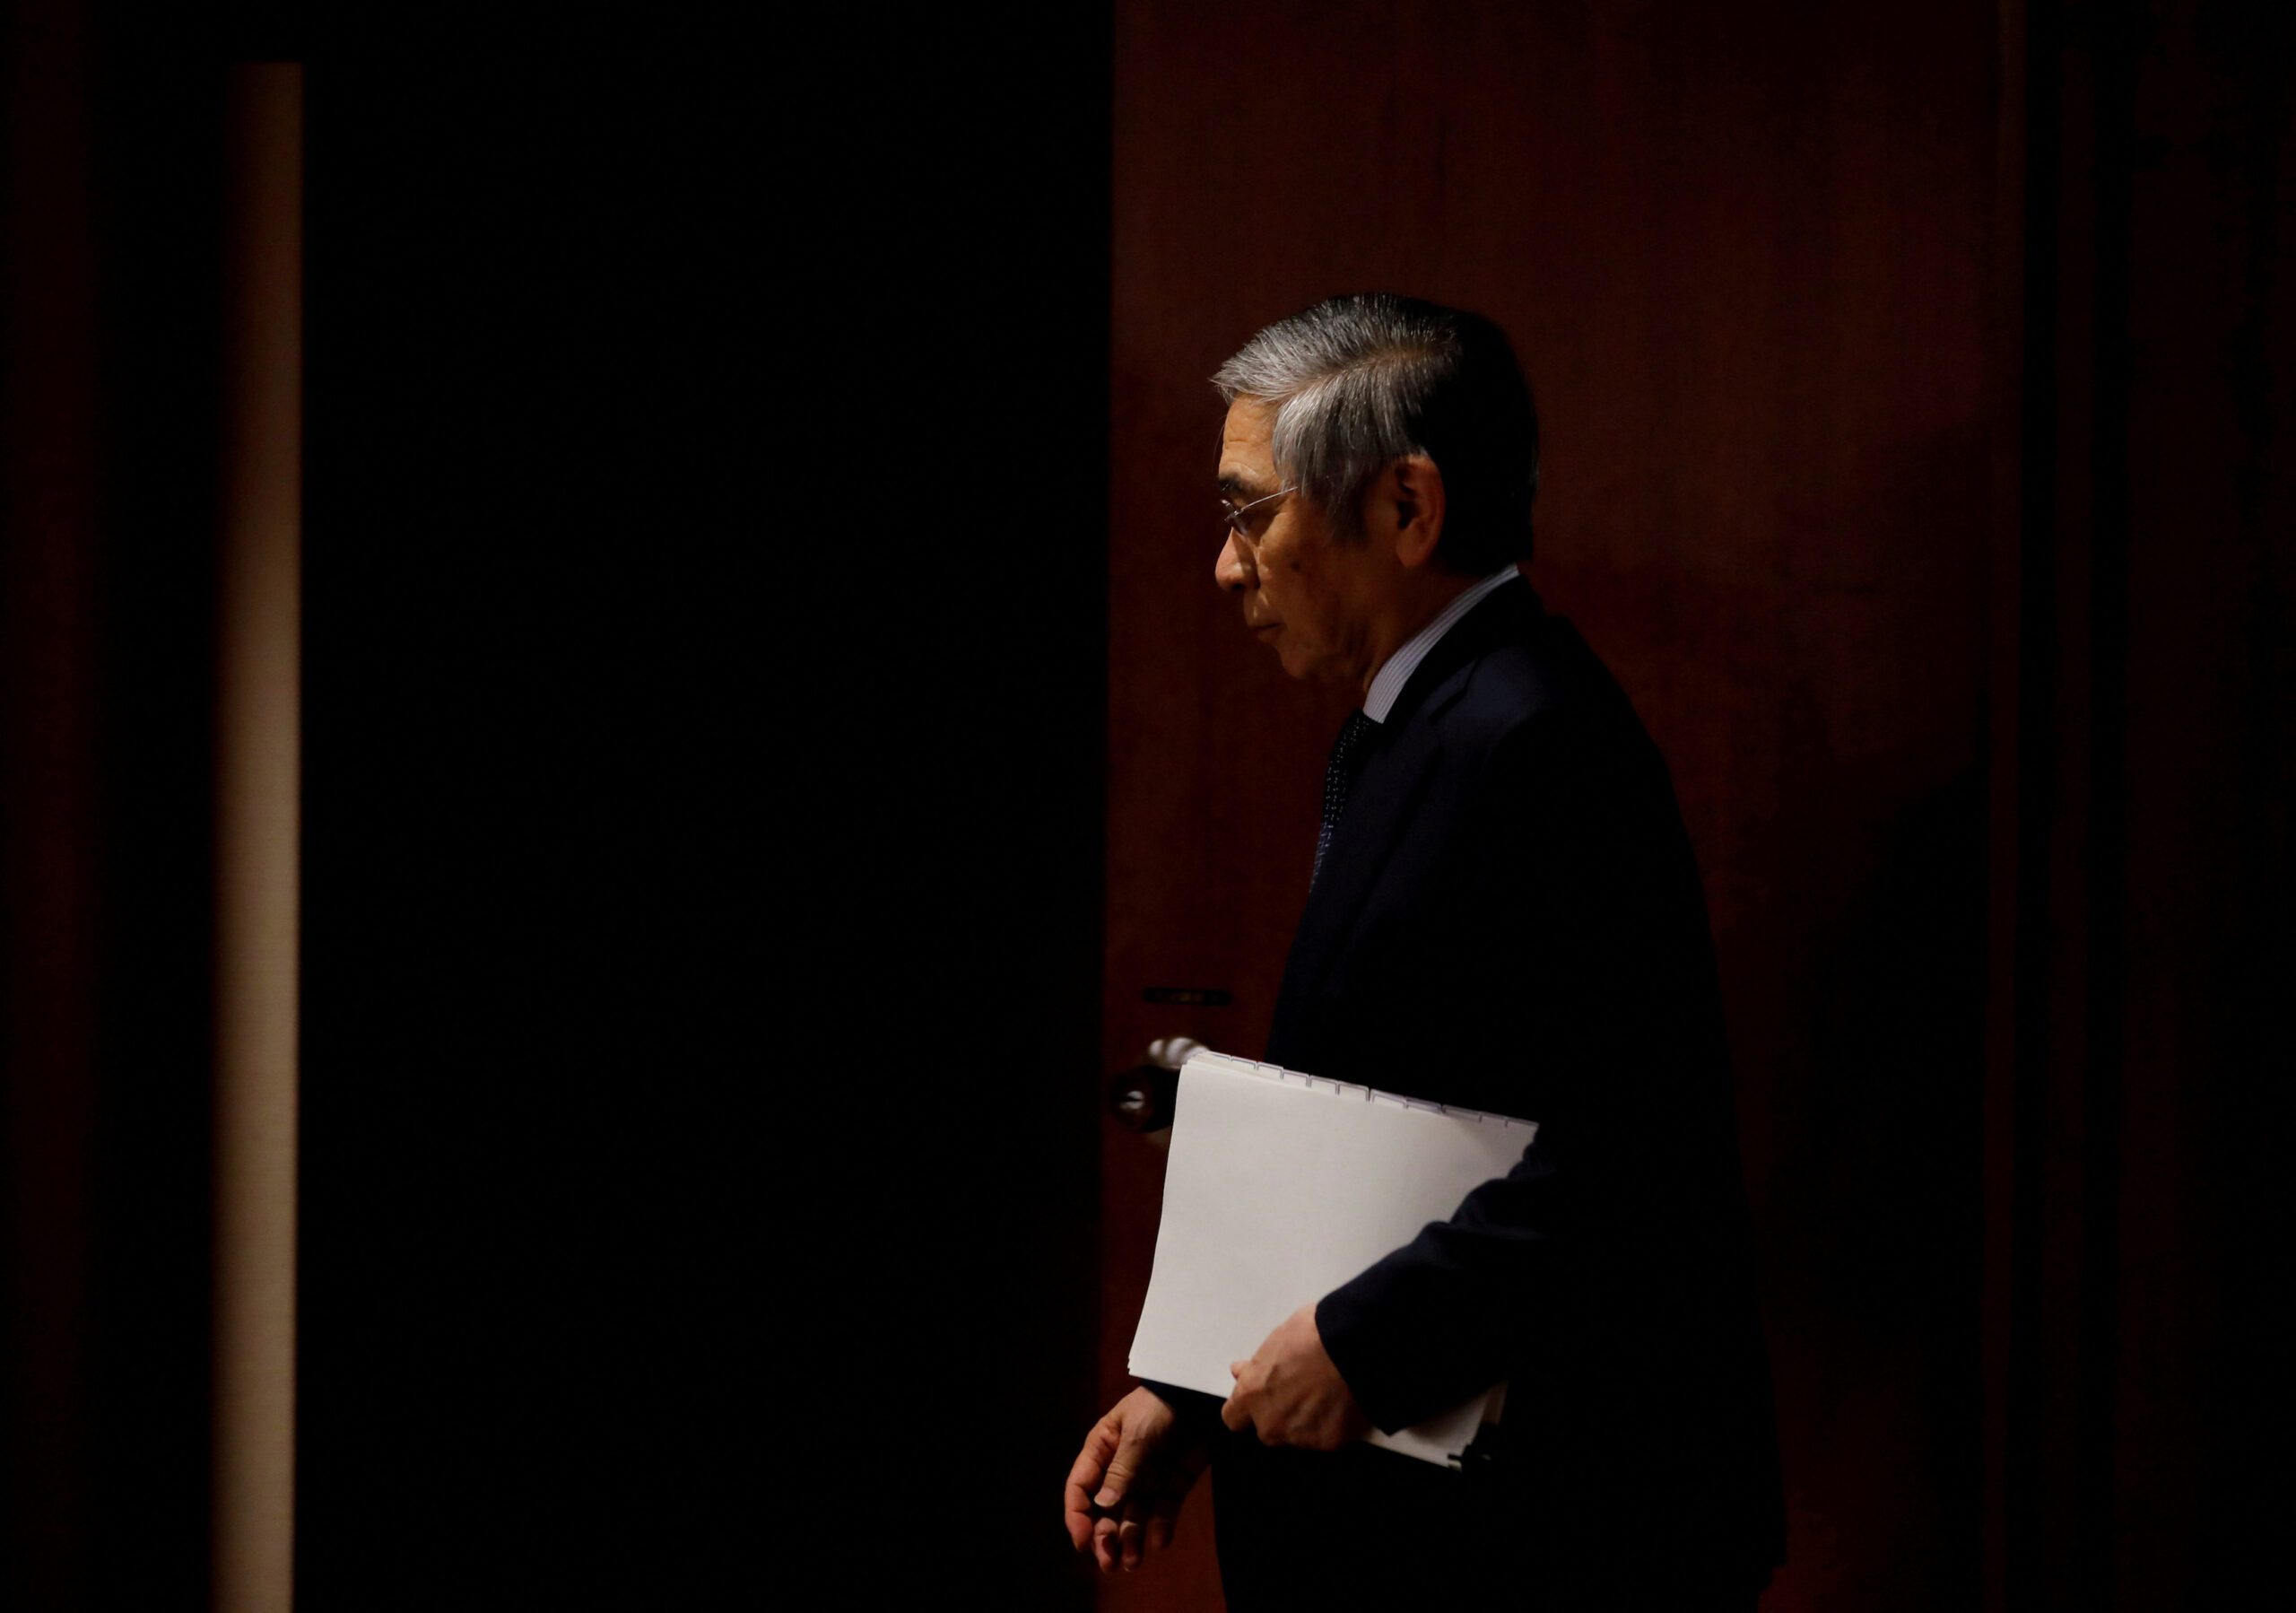 Kuroda’s shock therapy leaves Bank of Japan with mixed legacy